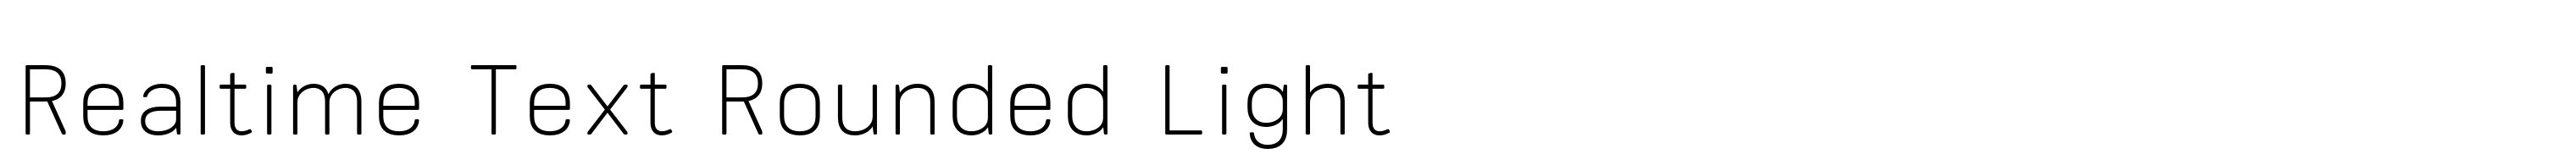 Realtime Text Rounded Light